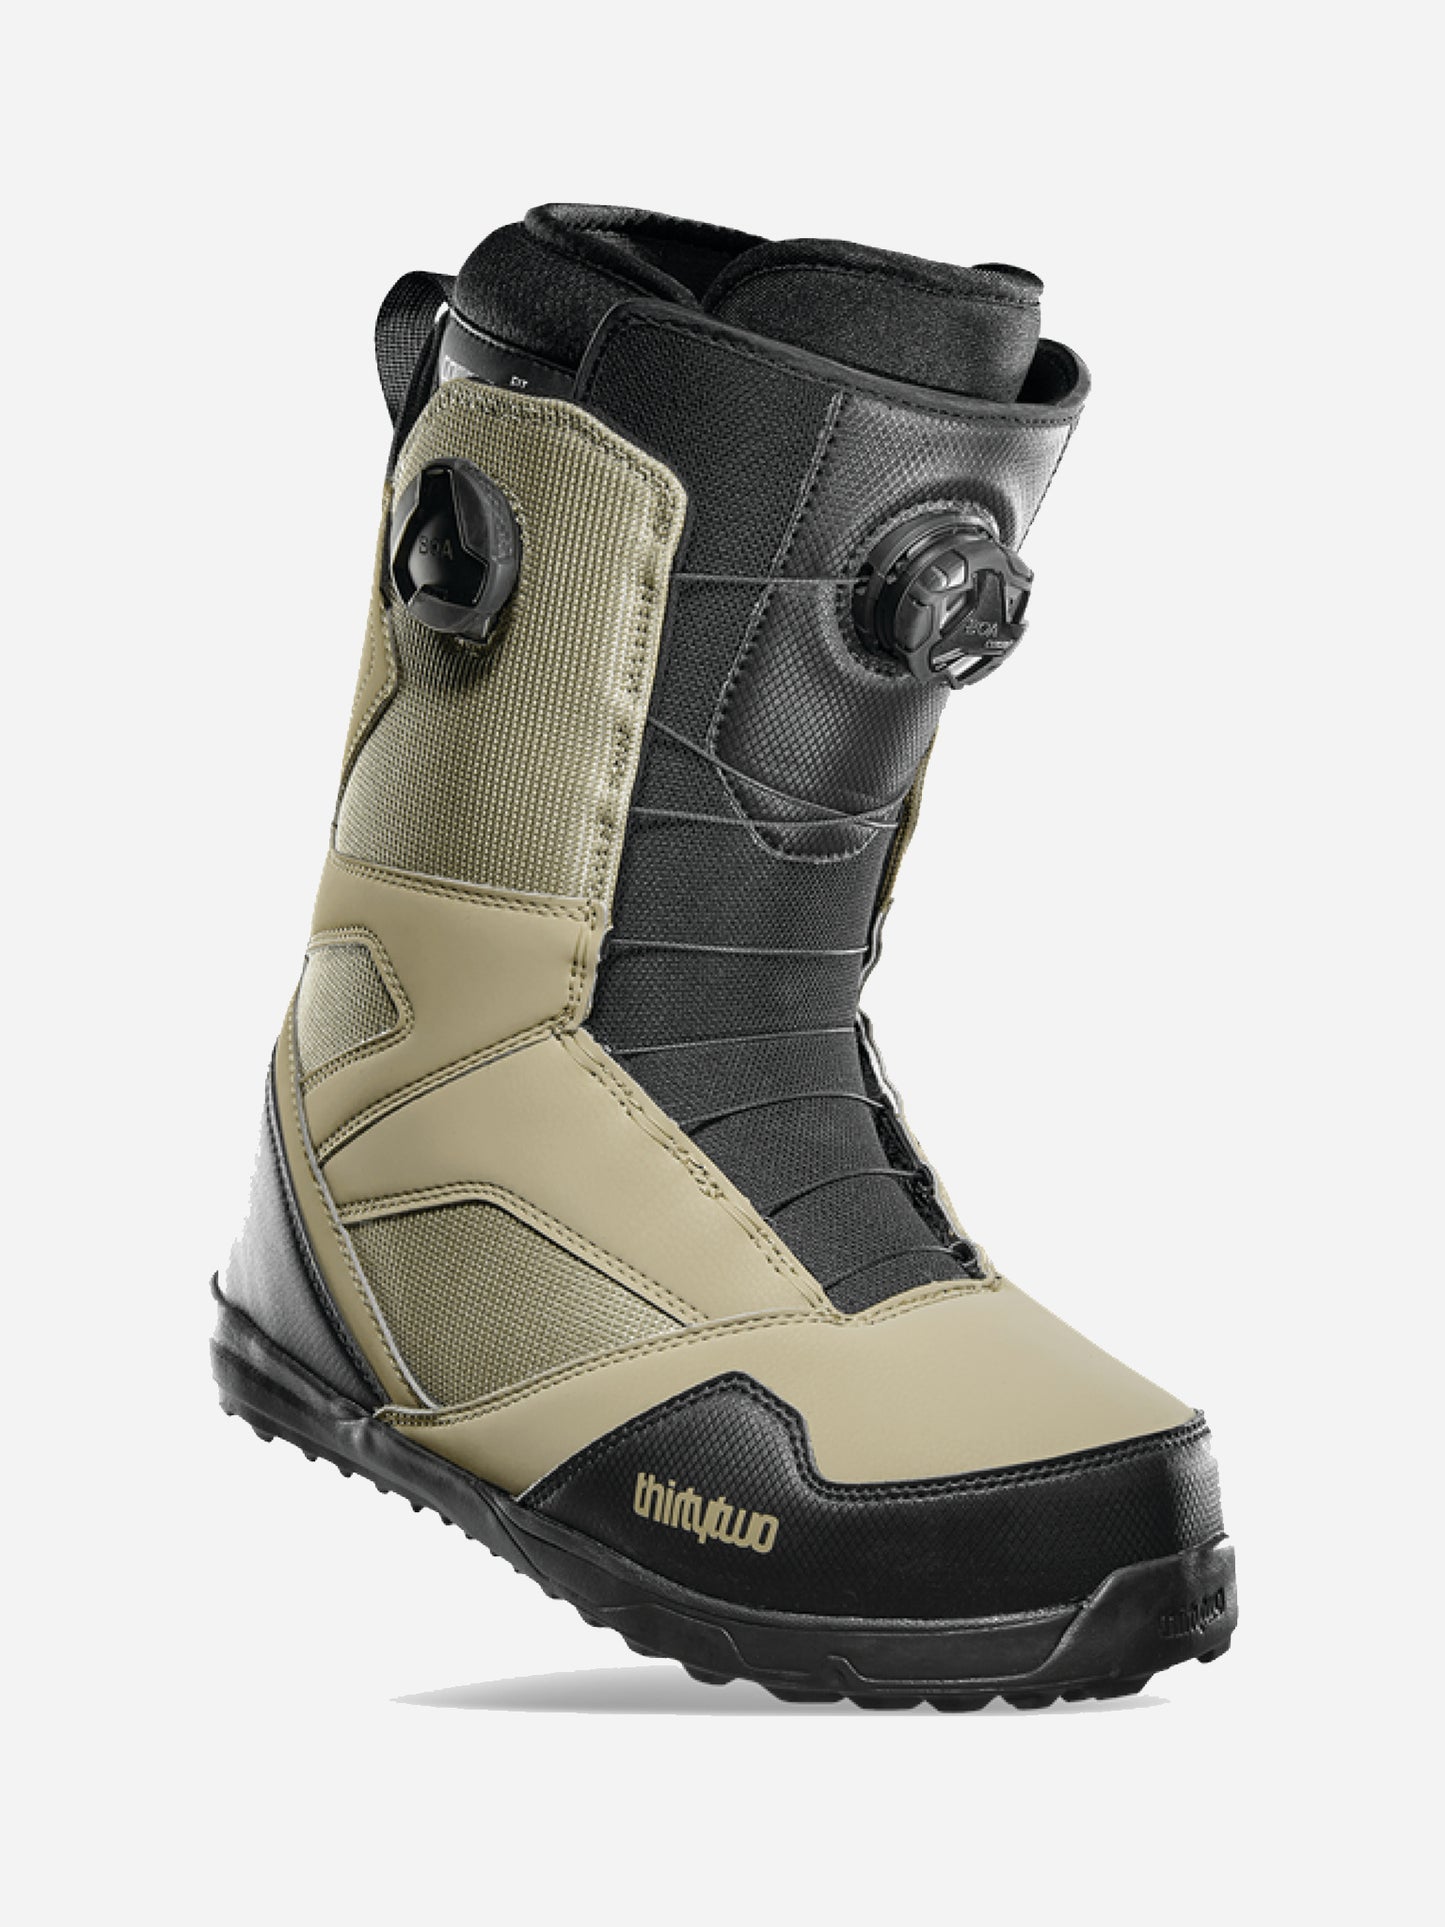 Thirtytwo STW Double Boa Snowboard Boots 2022